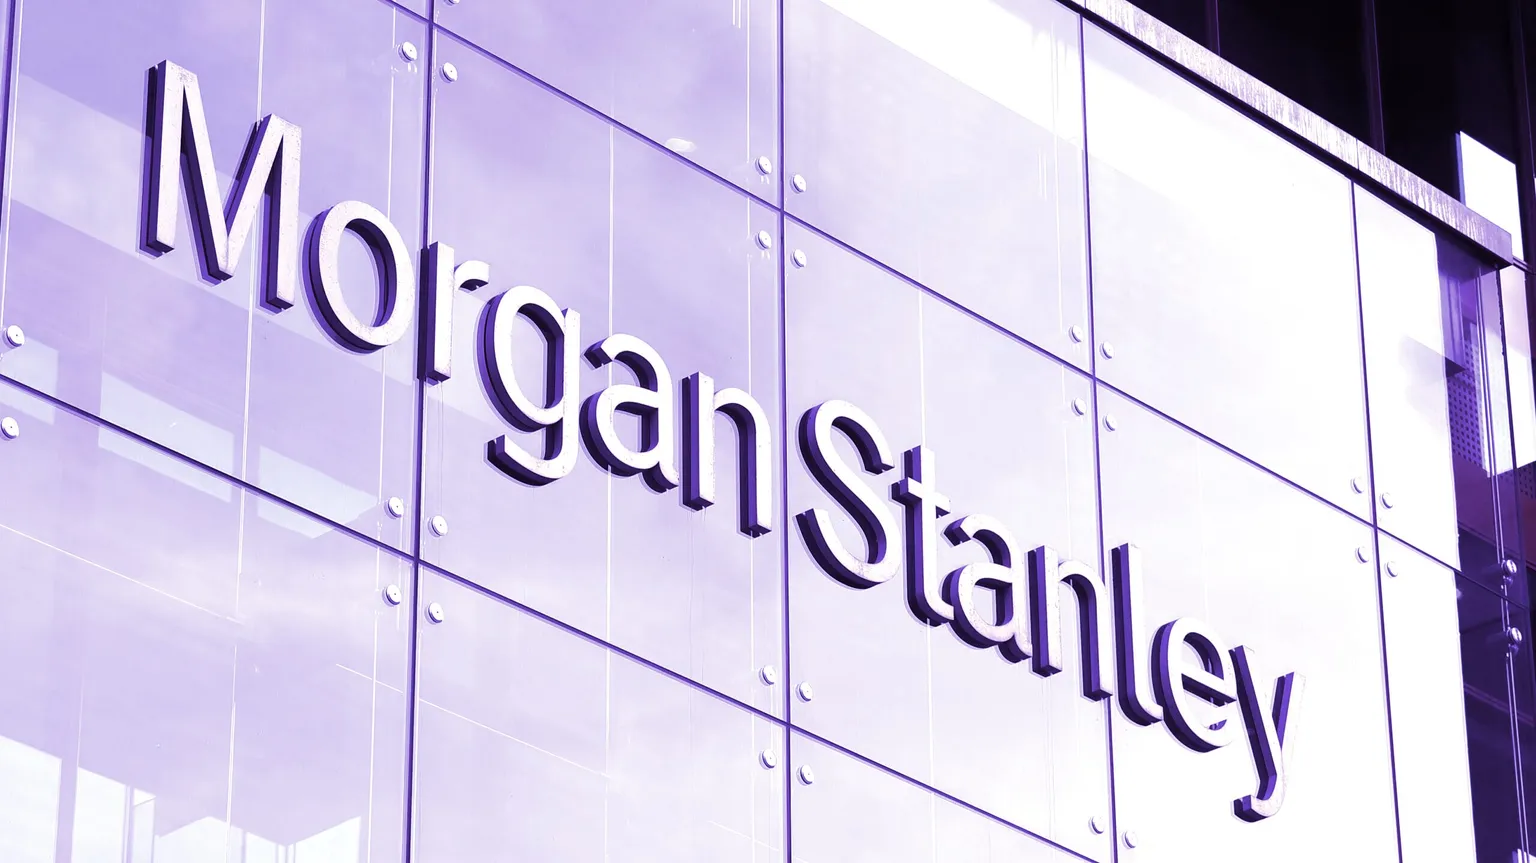 Morgan Stanley is one of the biggest financial institutions in the world. Image: Shutterstock